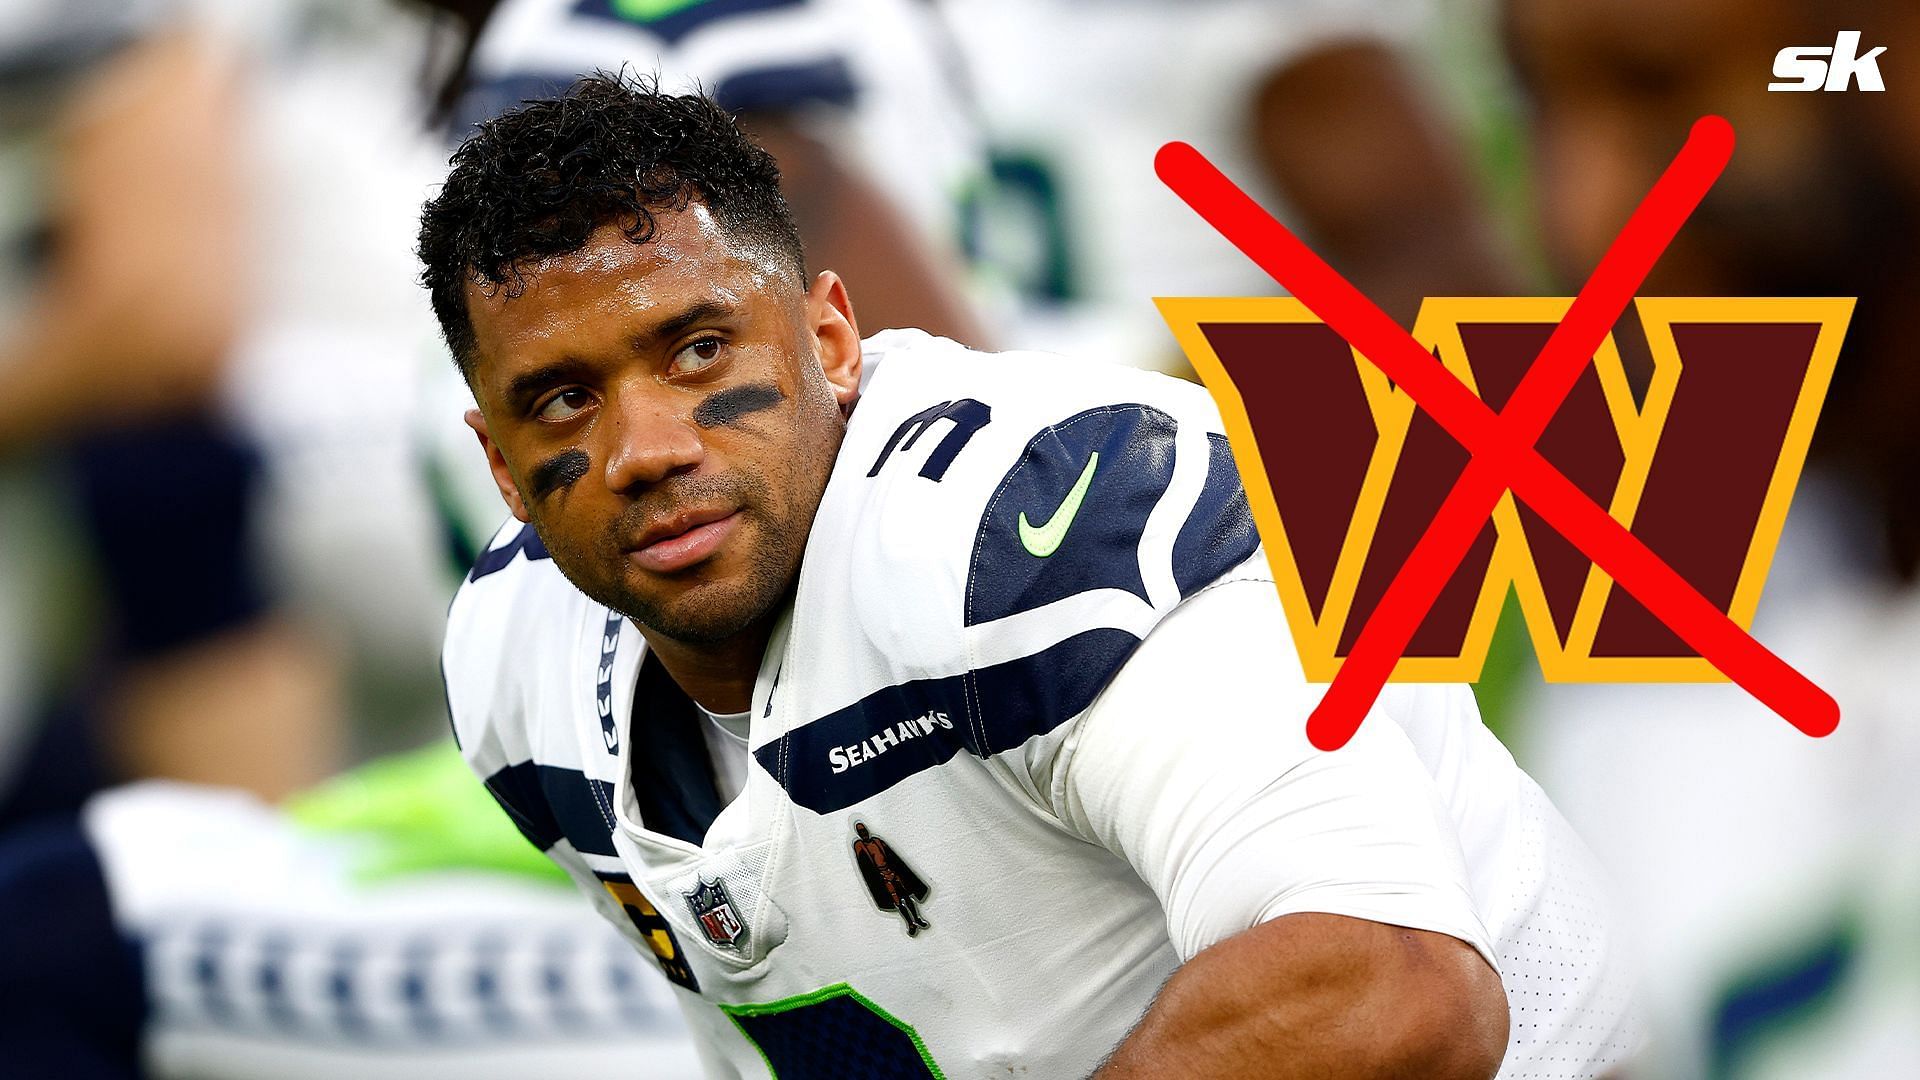 Russell Wilson may choose to avoid the Commanders